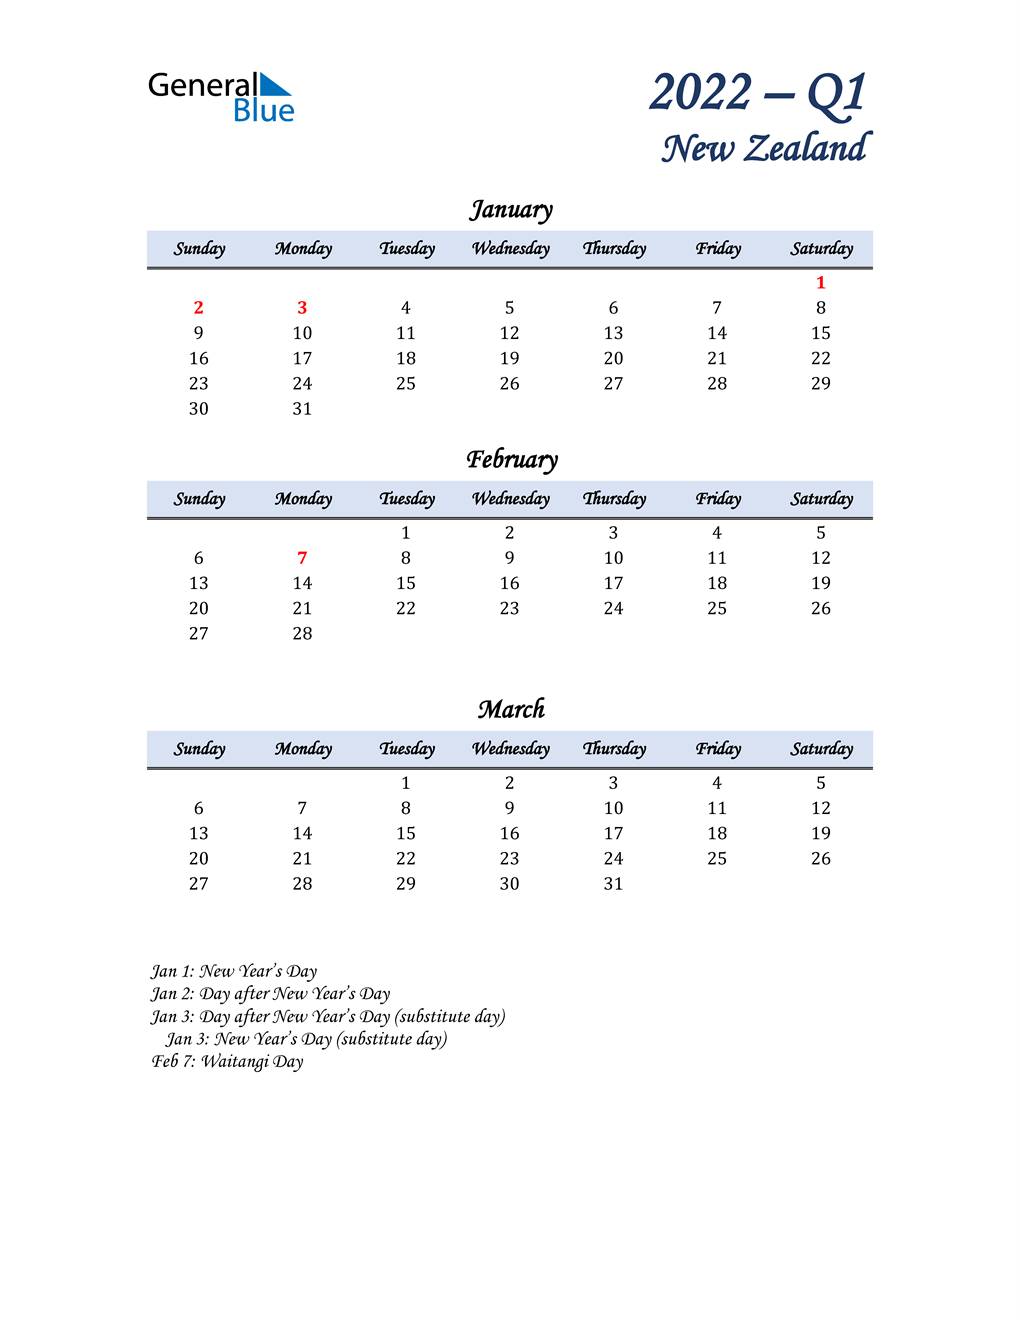  January, February, and March Calendar for New Zealand